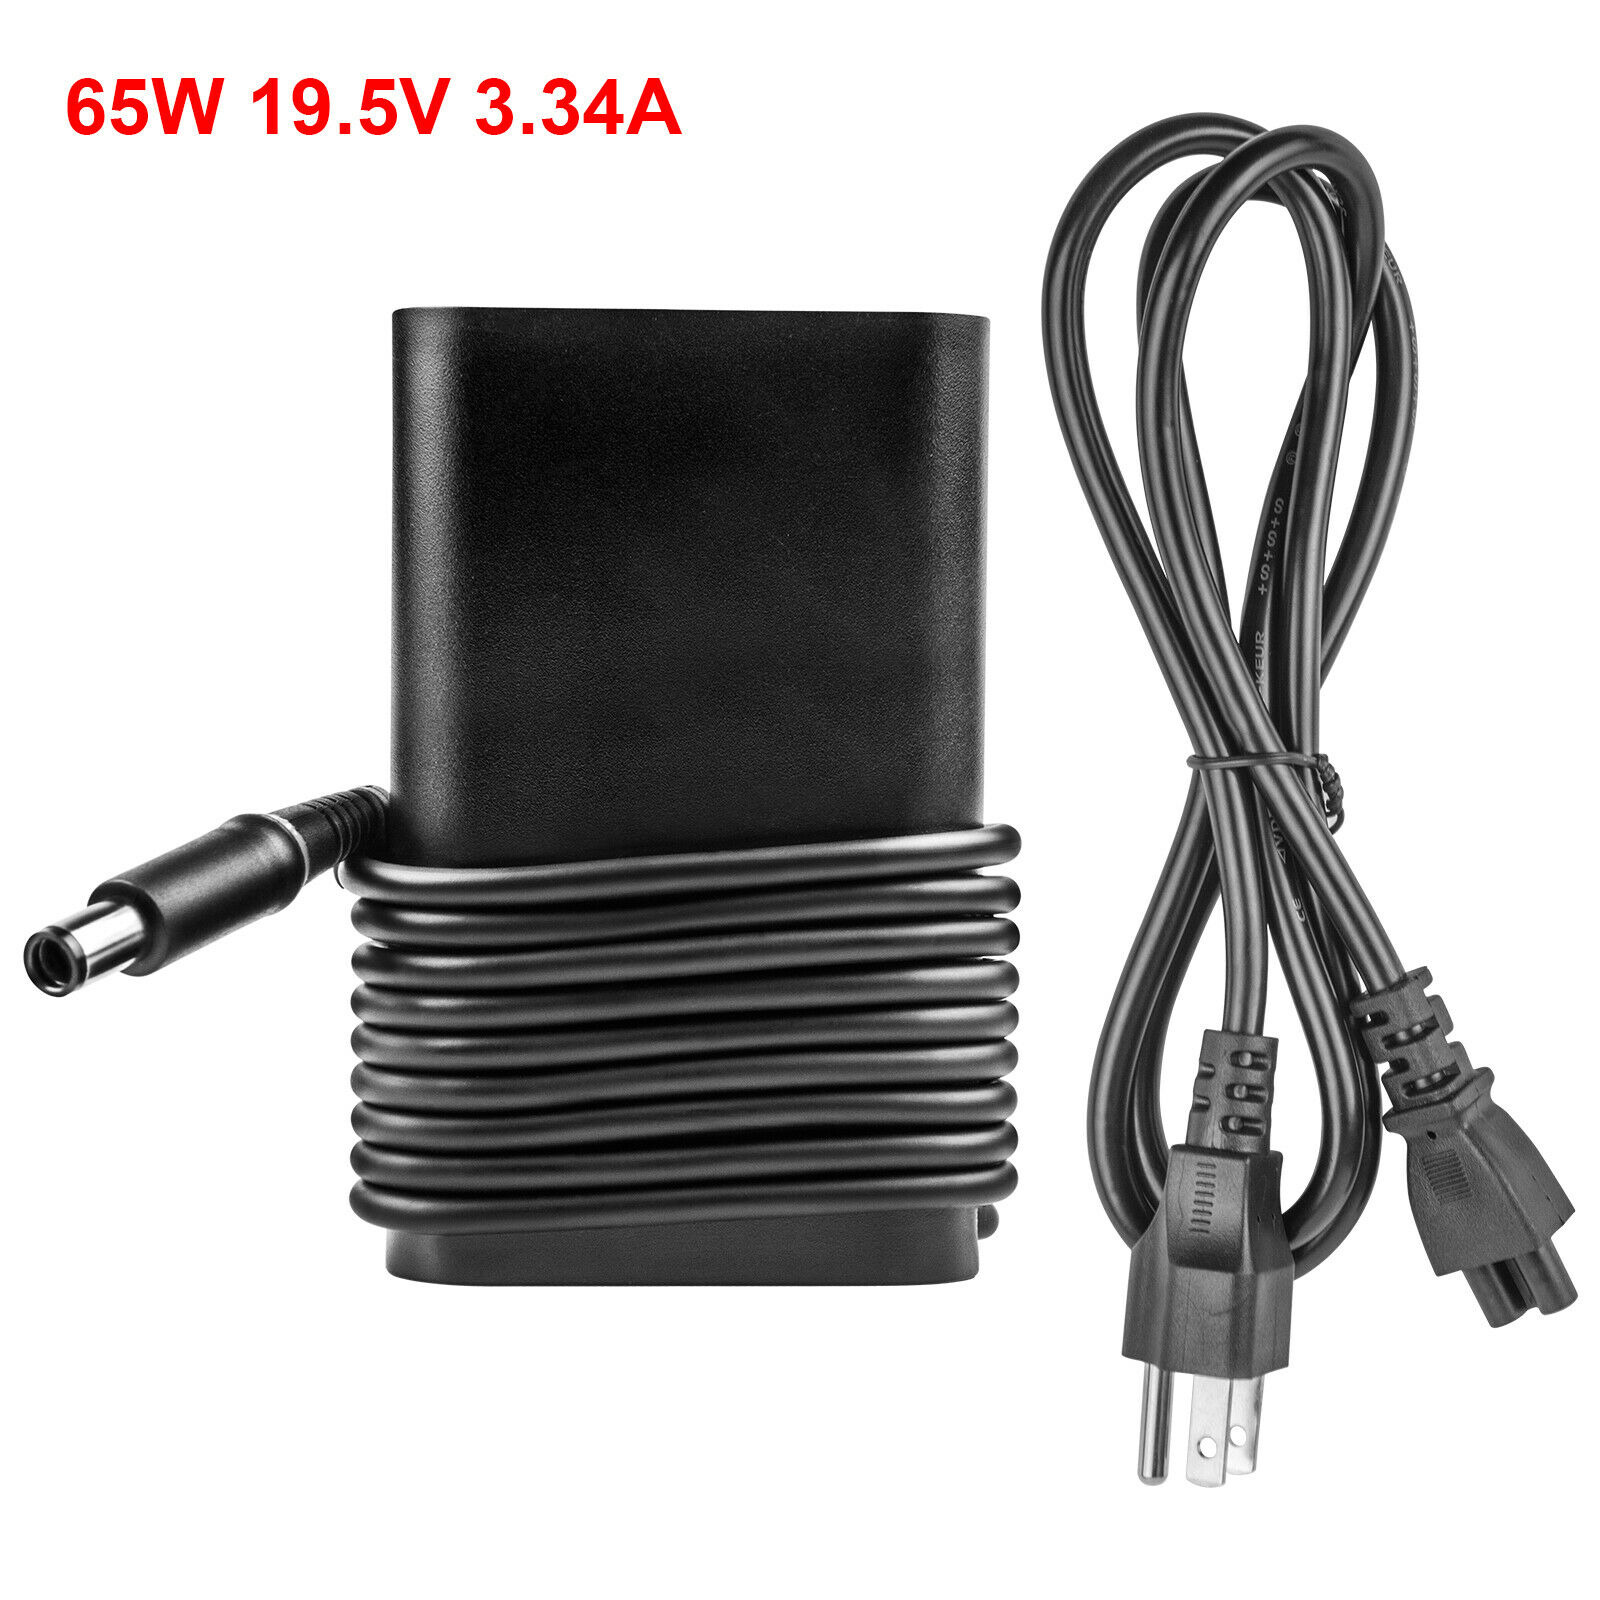 90W 65W 45W Laptop Charger Power Cord AC Adapter For Dell Inspiron Latitude XPS 